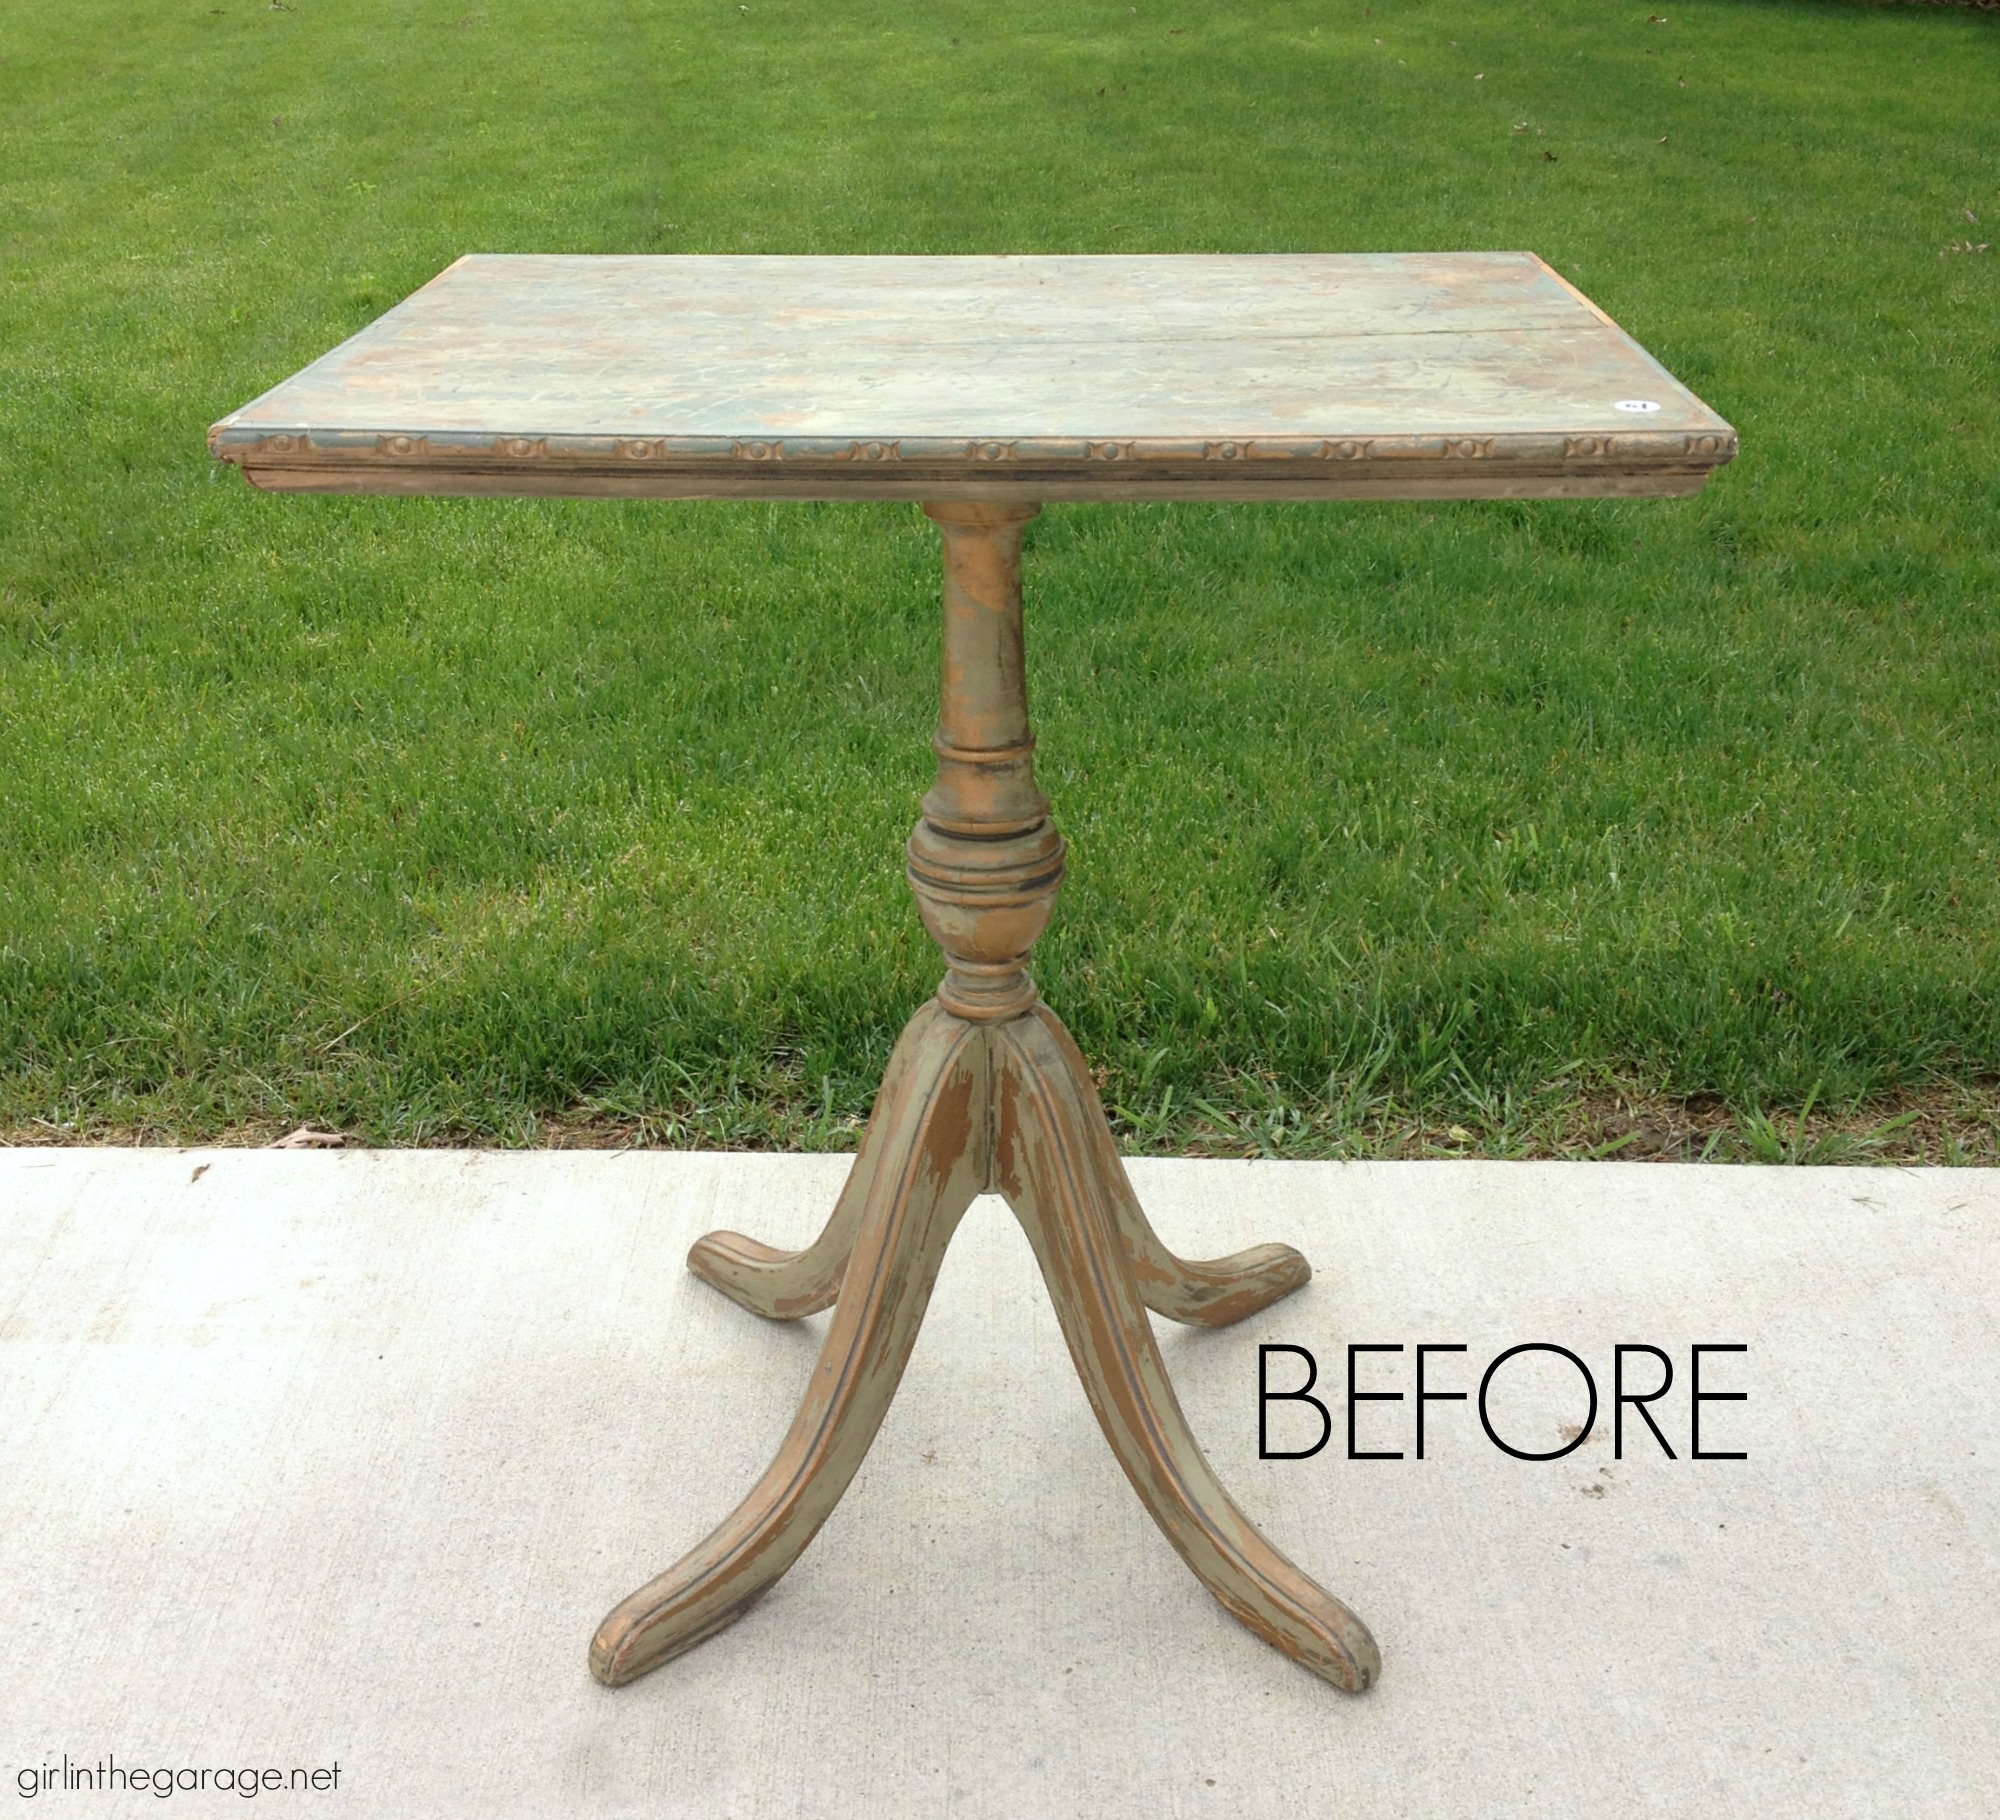 Rescue a poorly-painted antique and transform it into a beautiful French Country side table. Step by step tutorial by Girl in the Garage